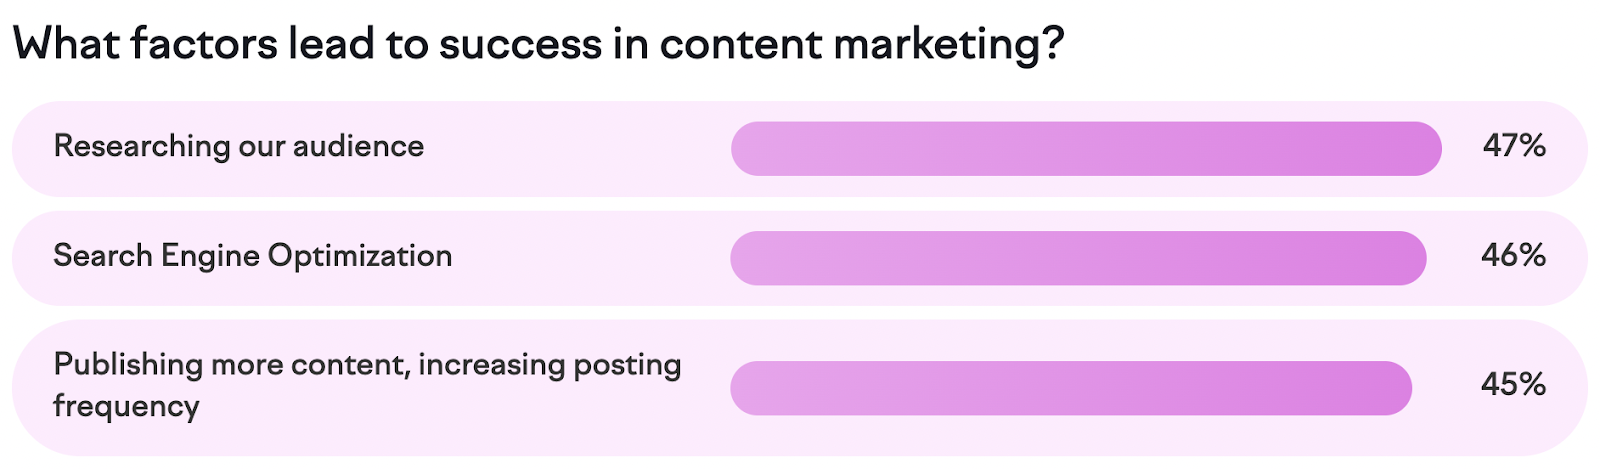 What factors lead to success in content marketing